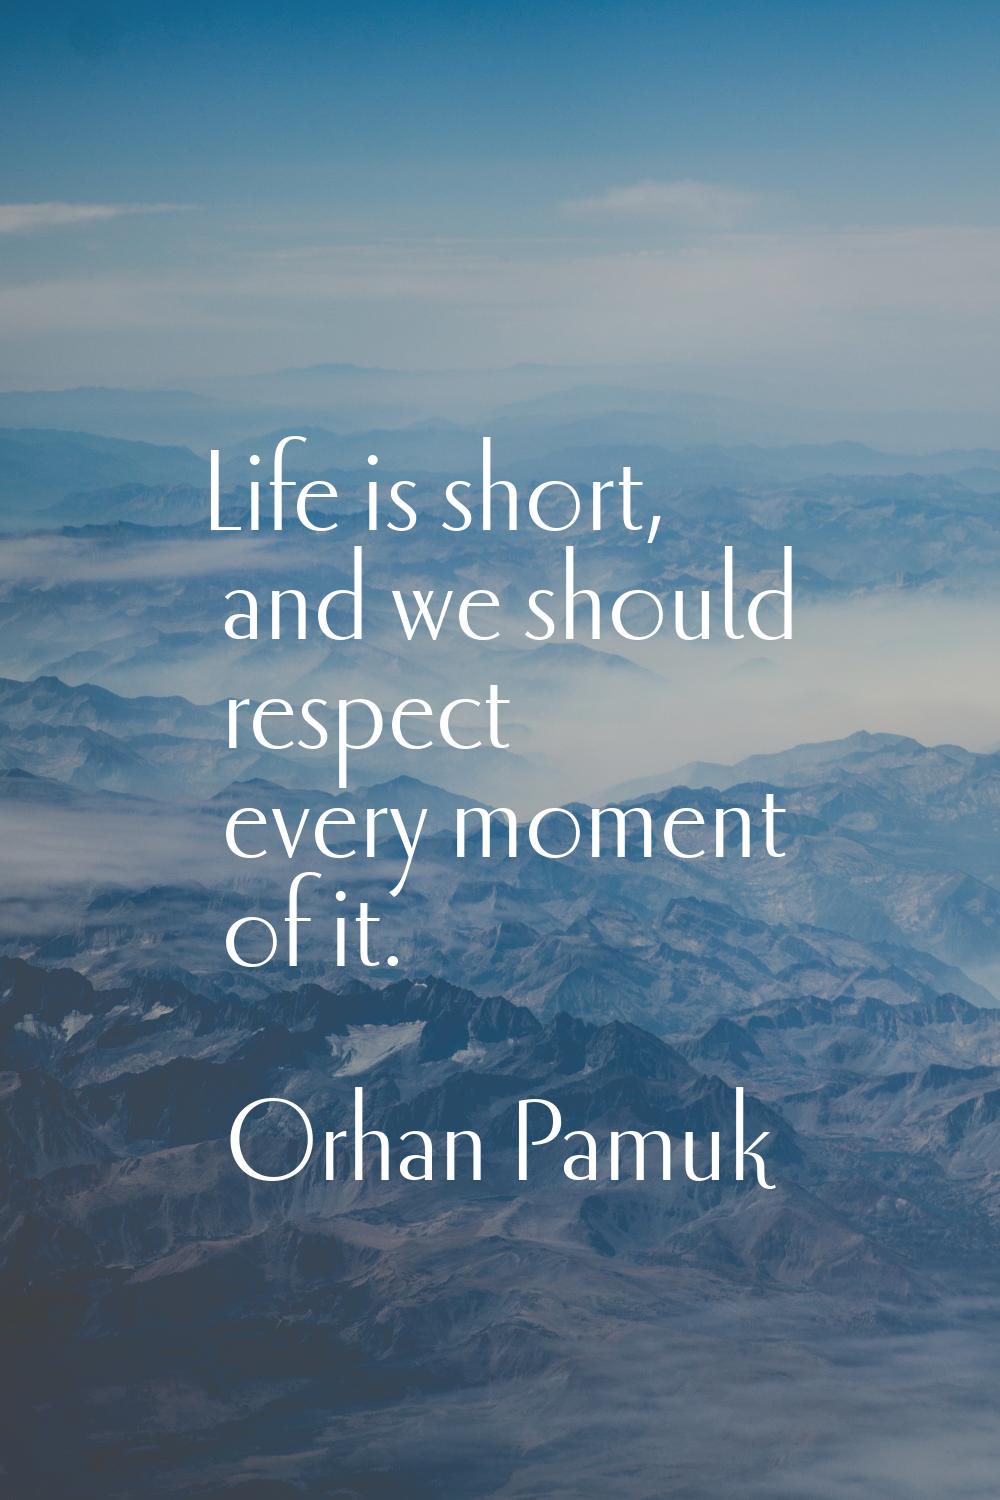 Life is short, and we should respect every moment of it.